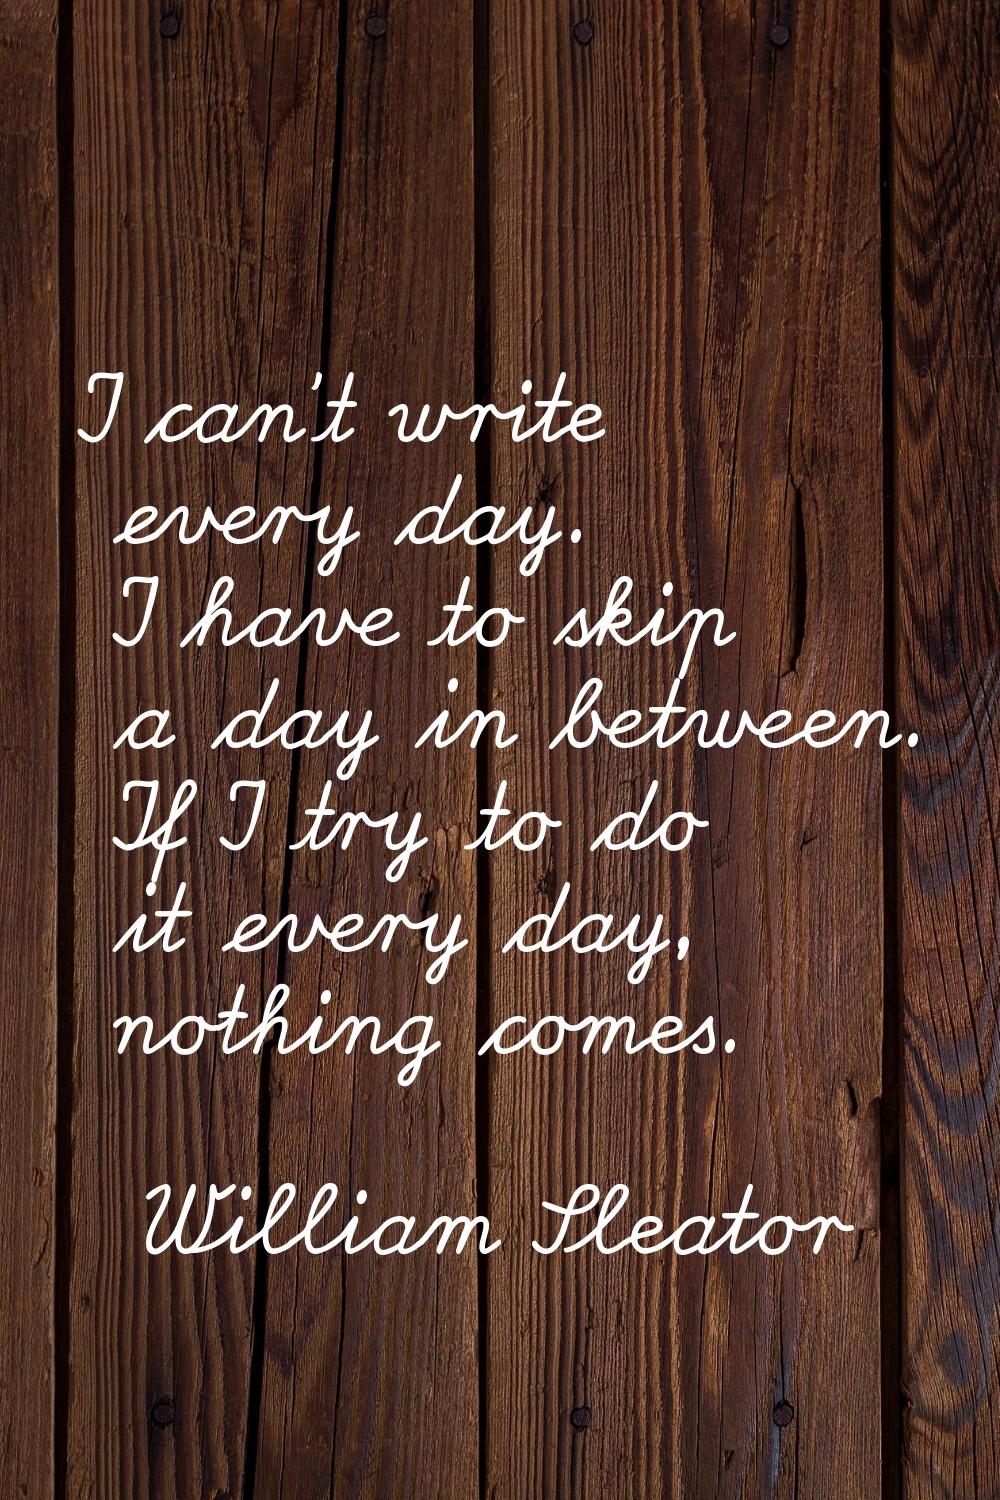 I can't write every day. I have to skip a day in between. If I try to do it every day, nothing come